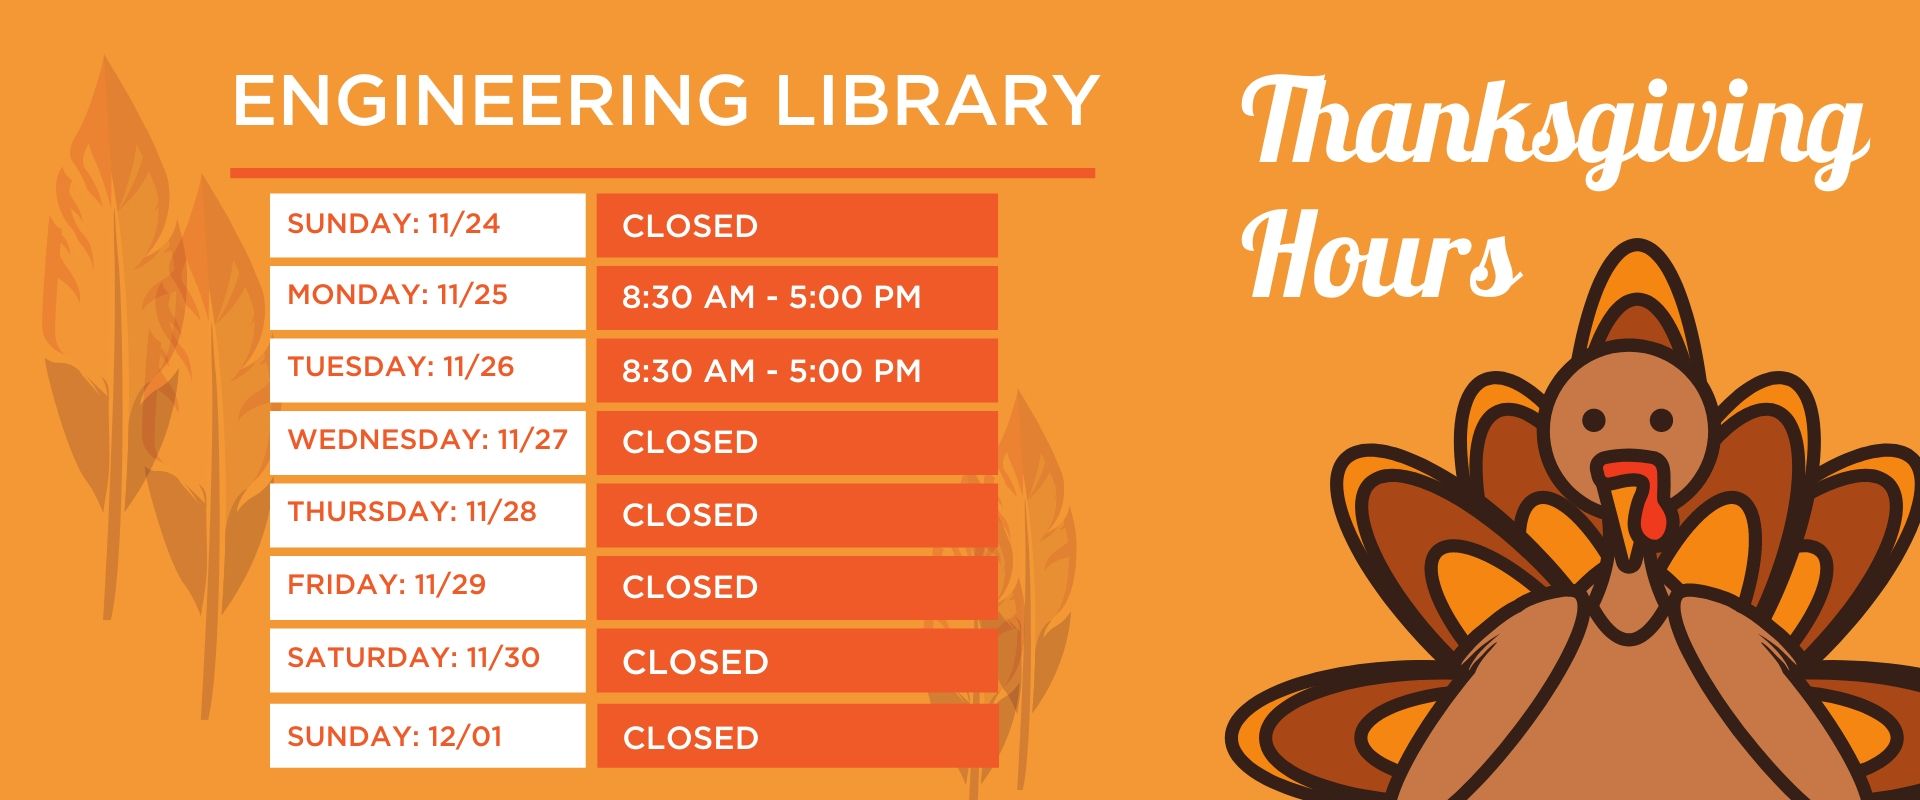 Library Thanksgiving Hours